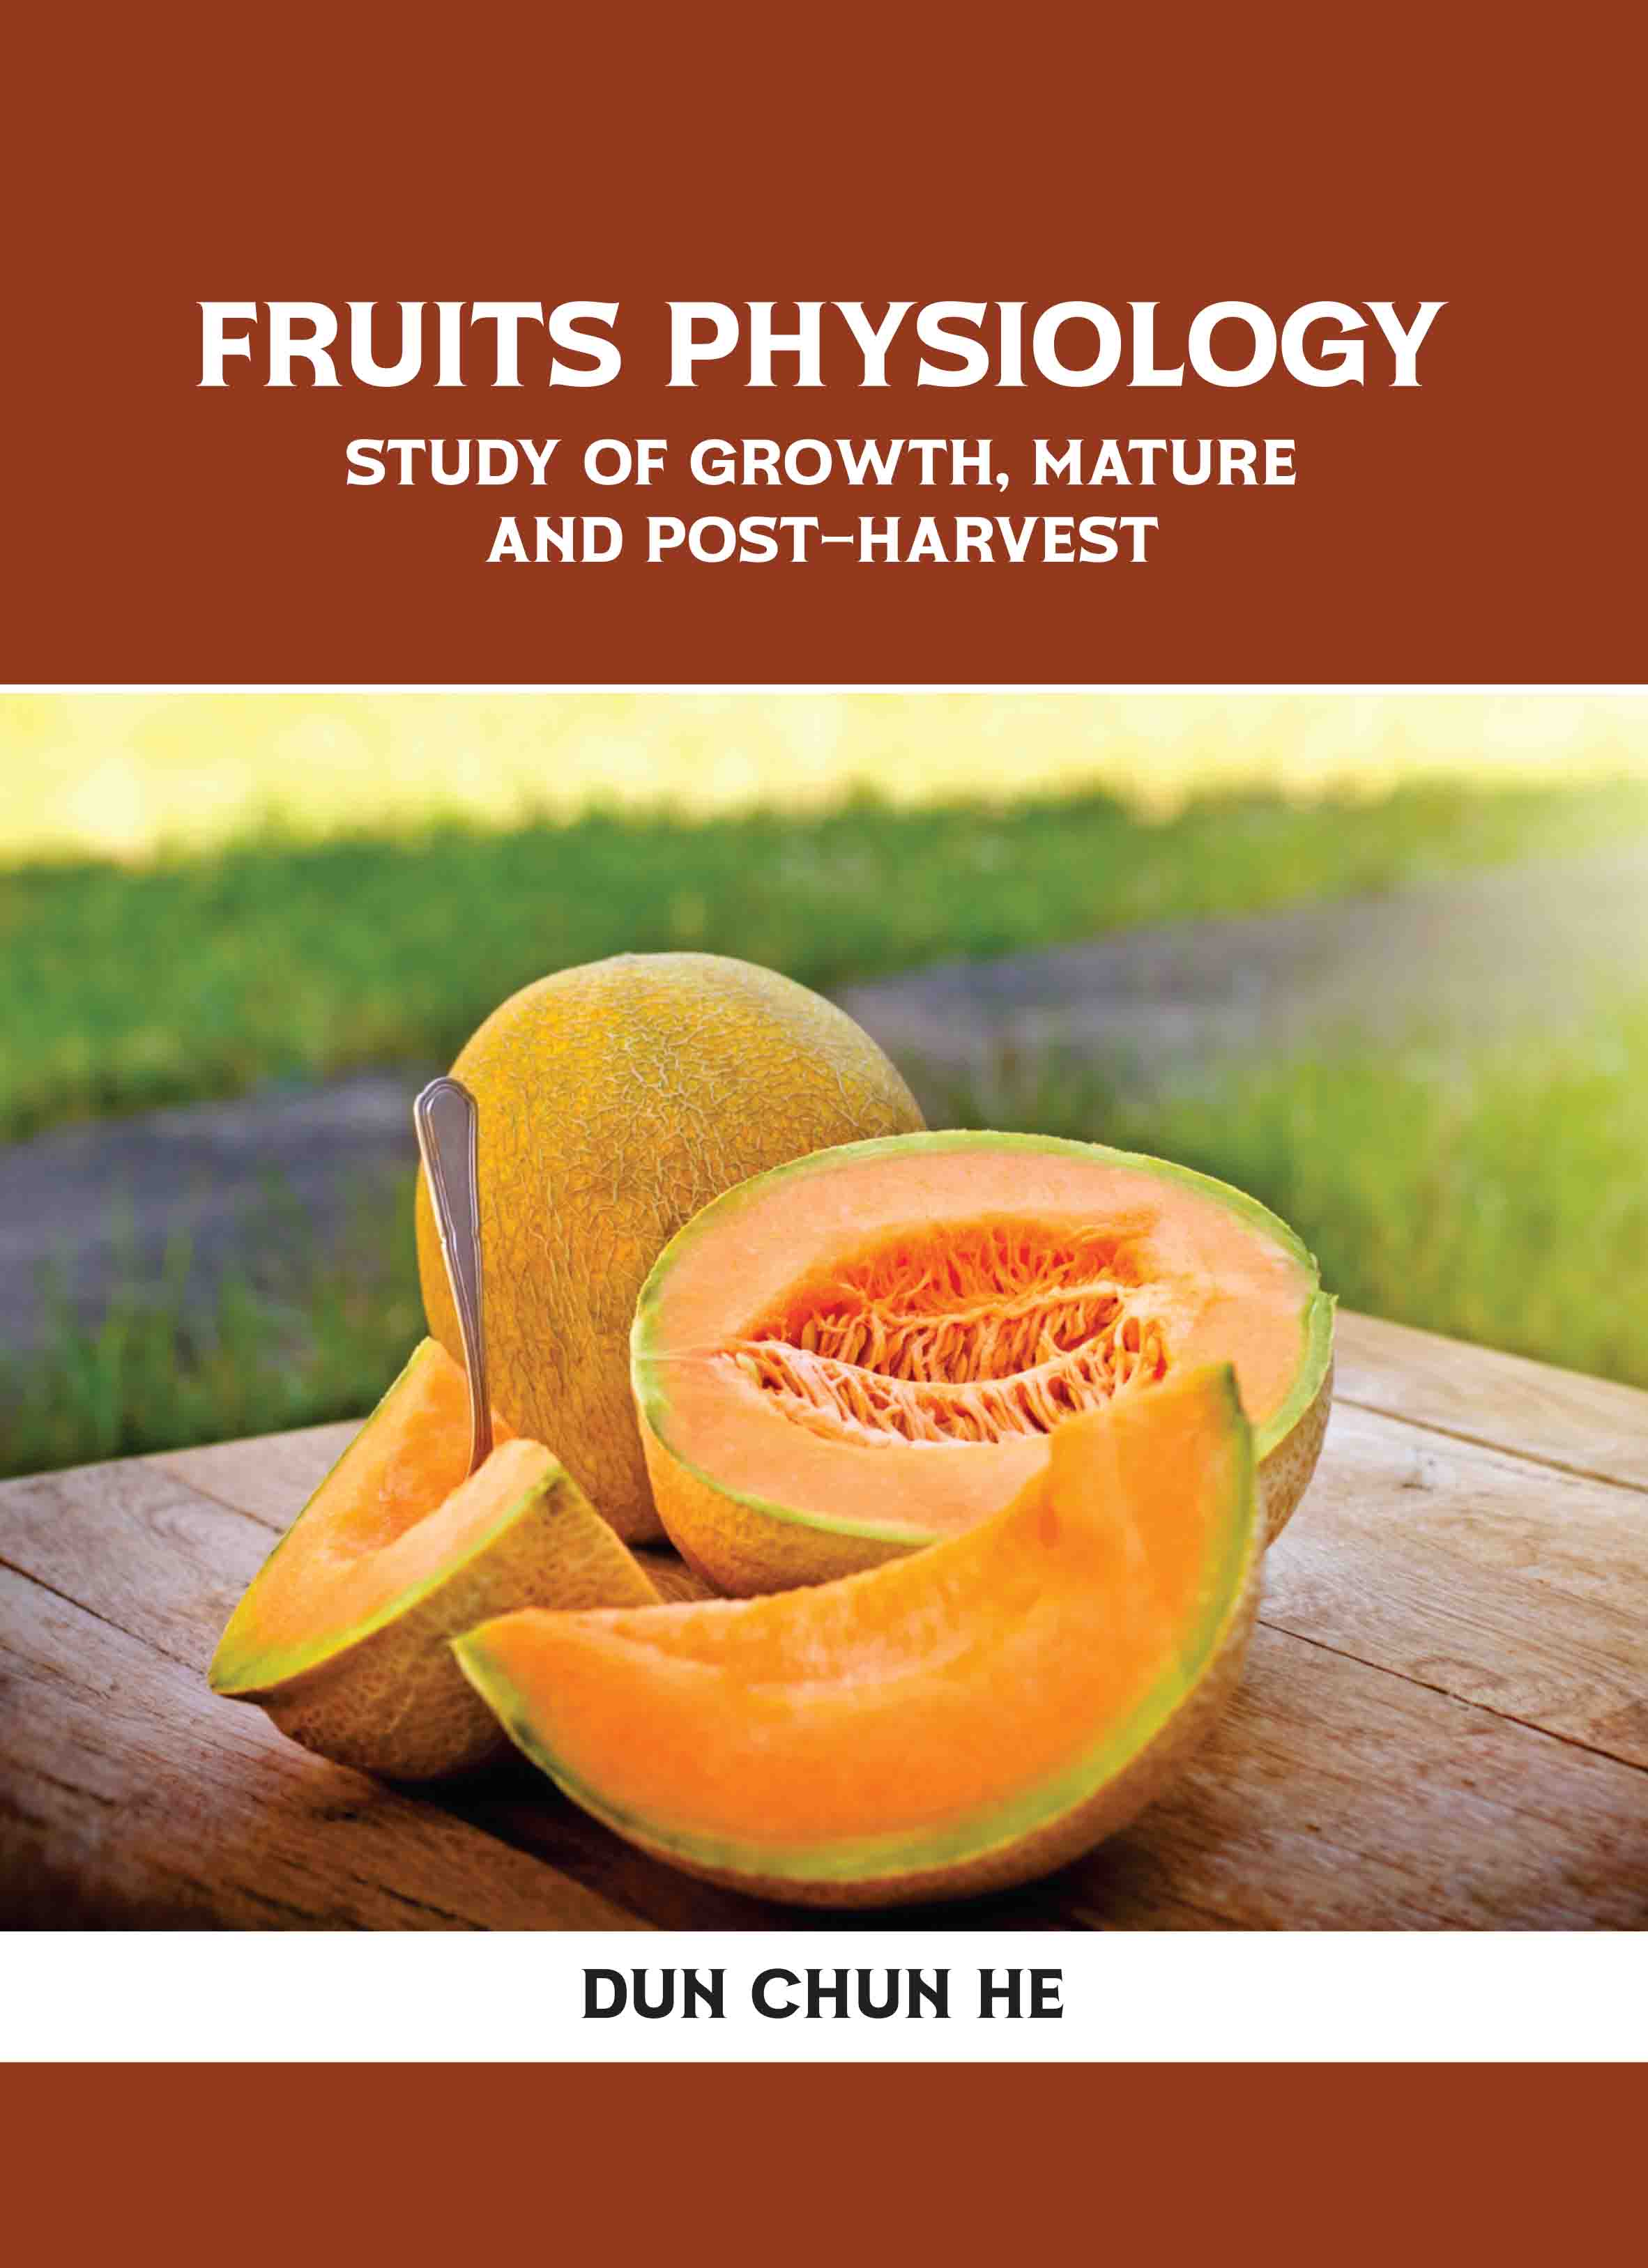 Fruits Physiology: Study of Growth, Mature and PostHarvest